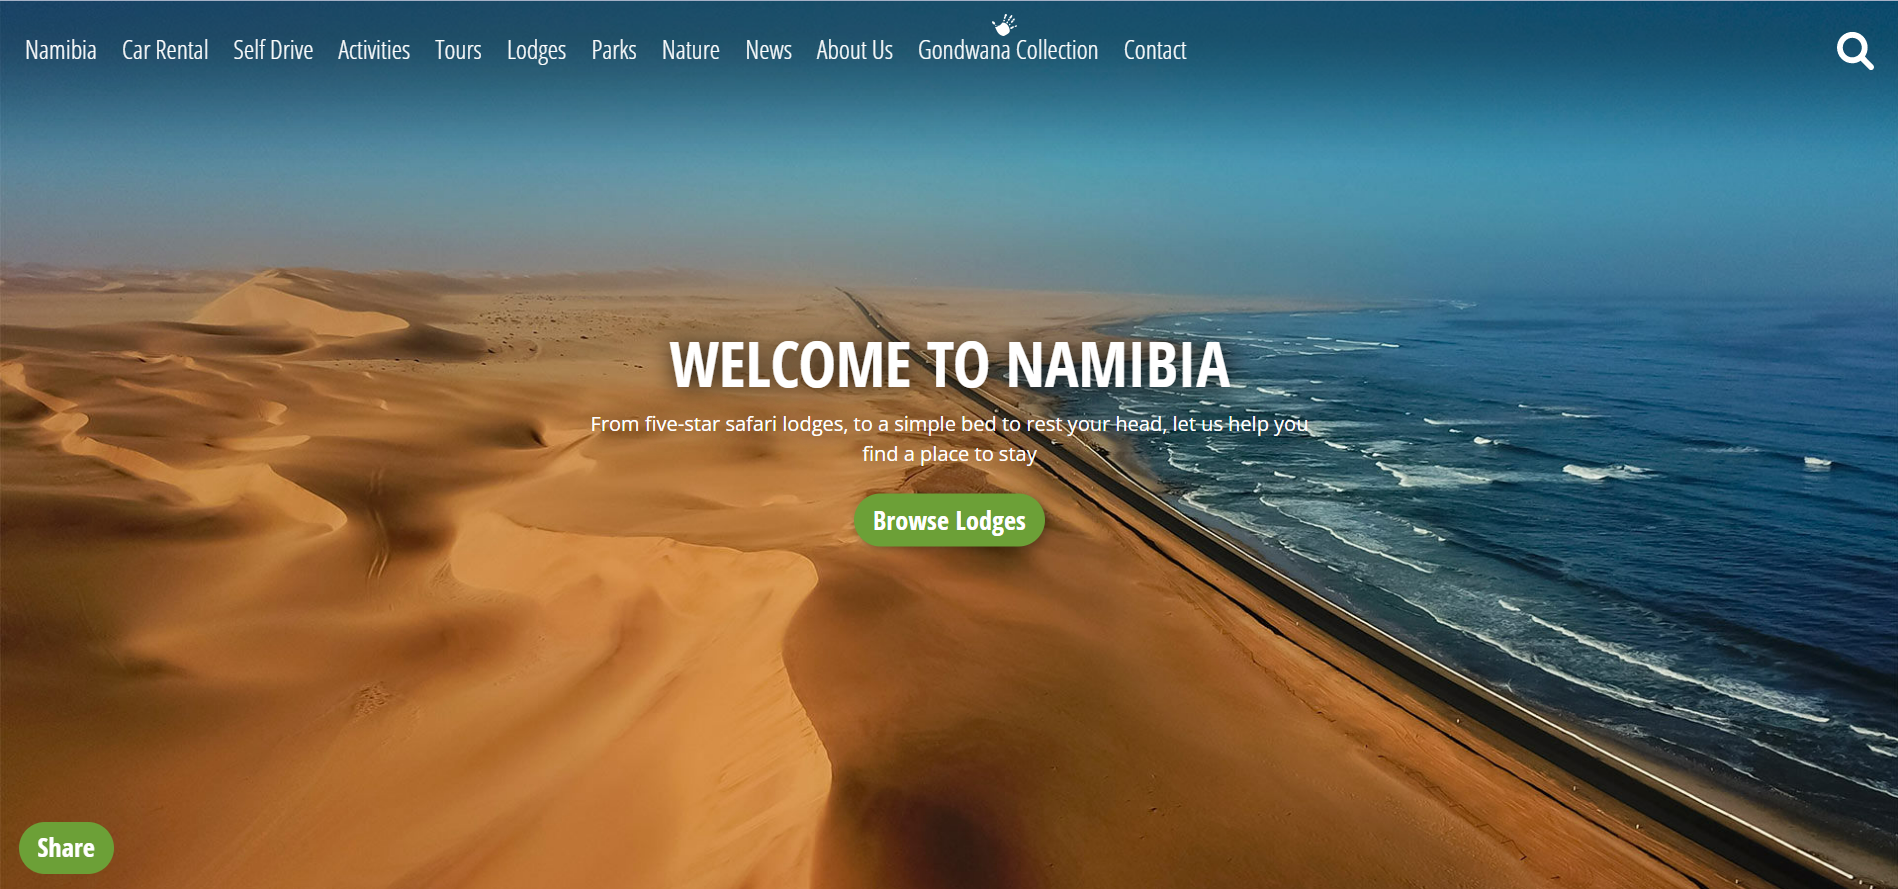 Namibian.org Home Page